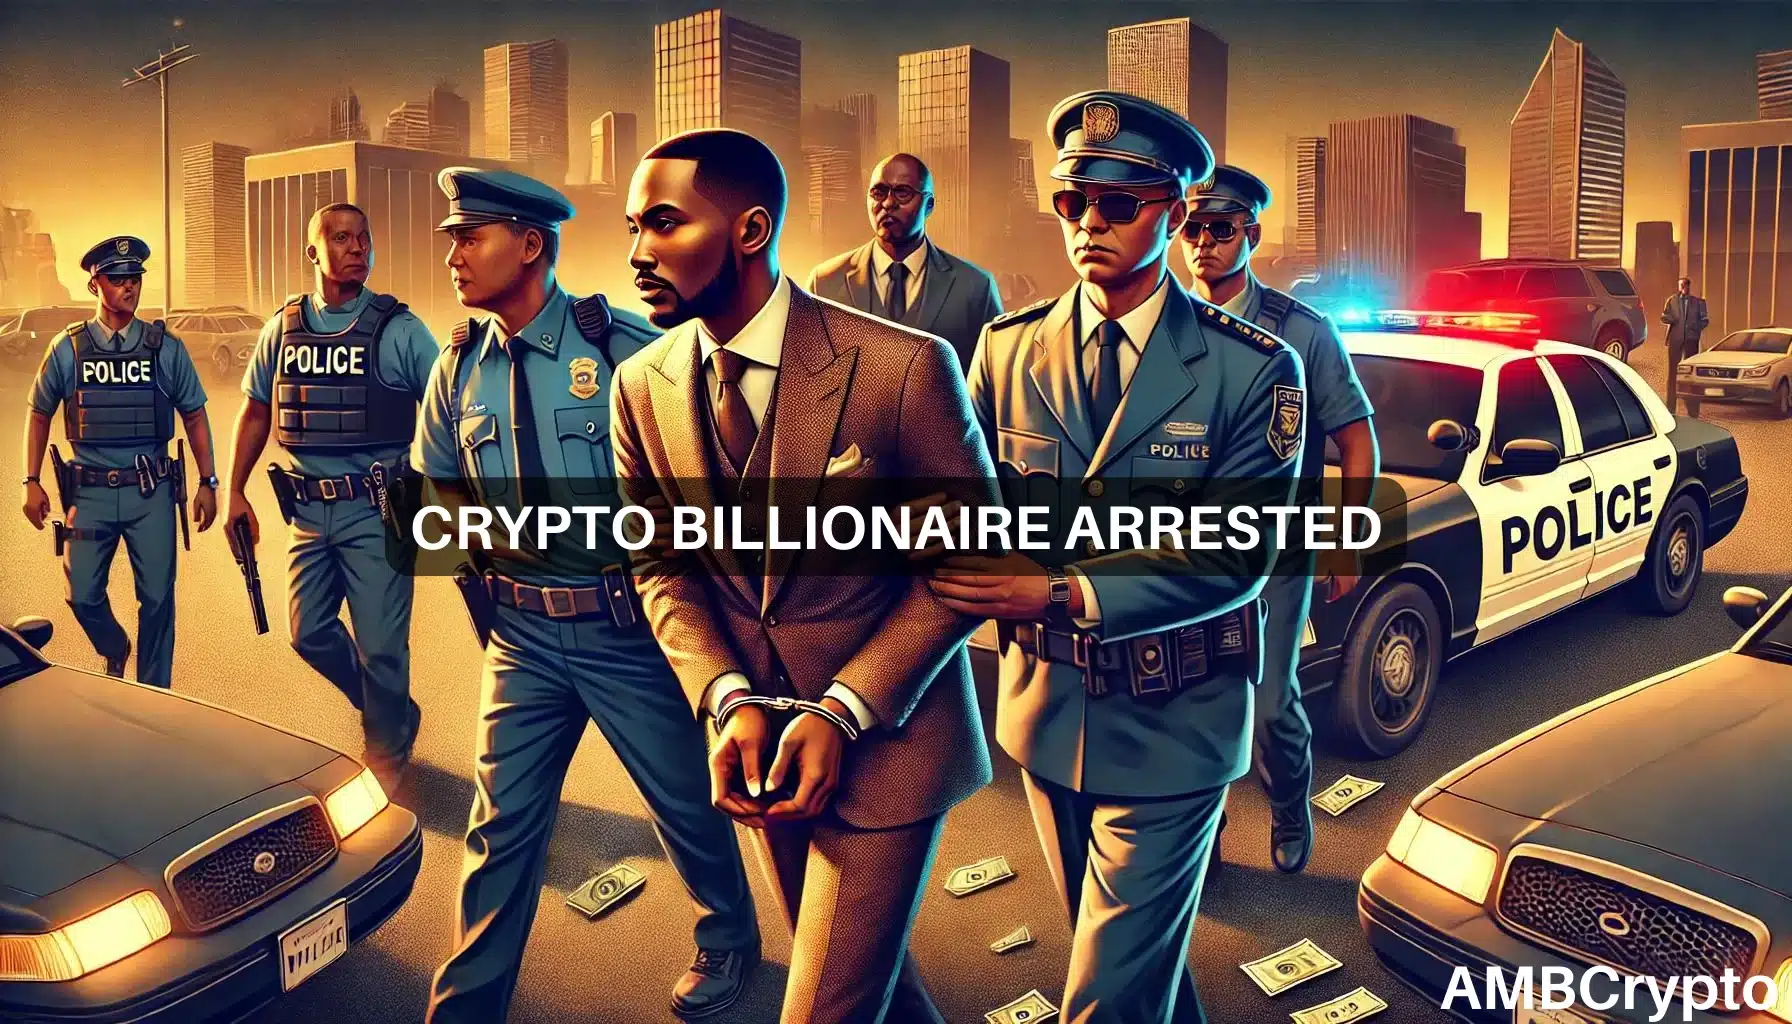 Nigerian ‘crypto billionaire’ arrested over fraud and funding terrorism charges